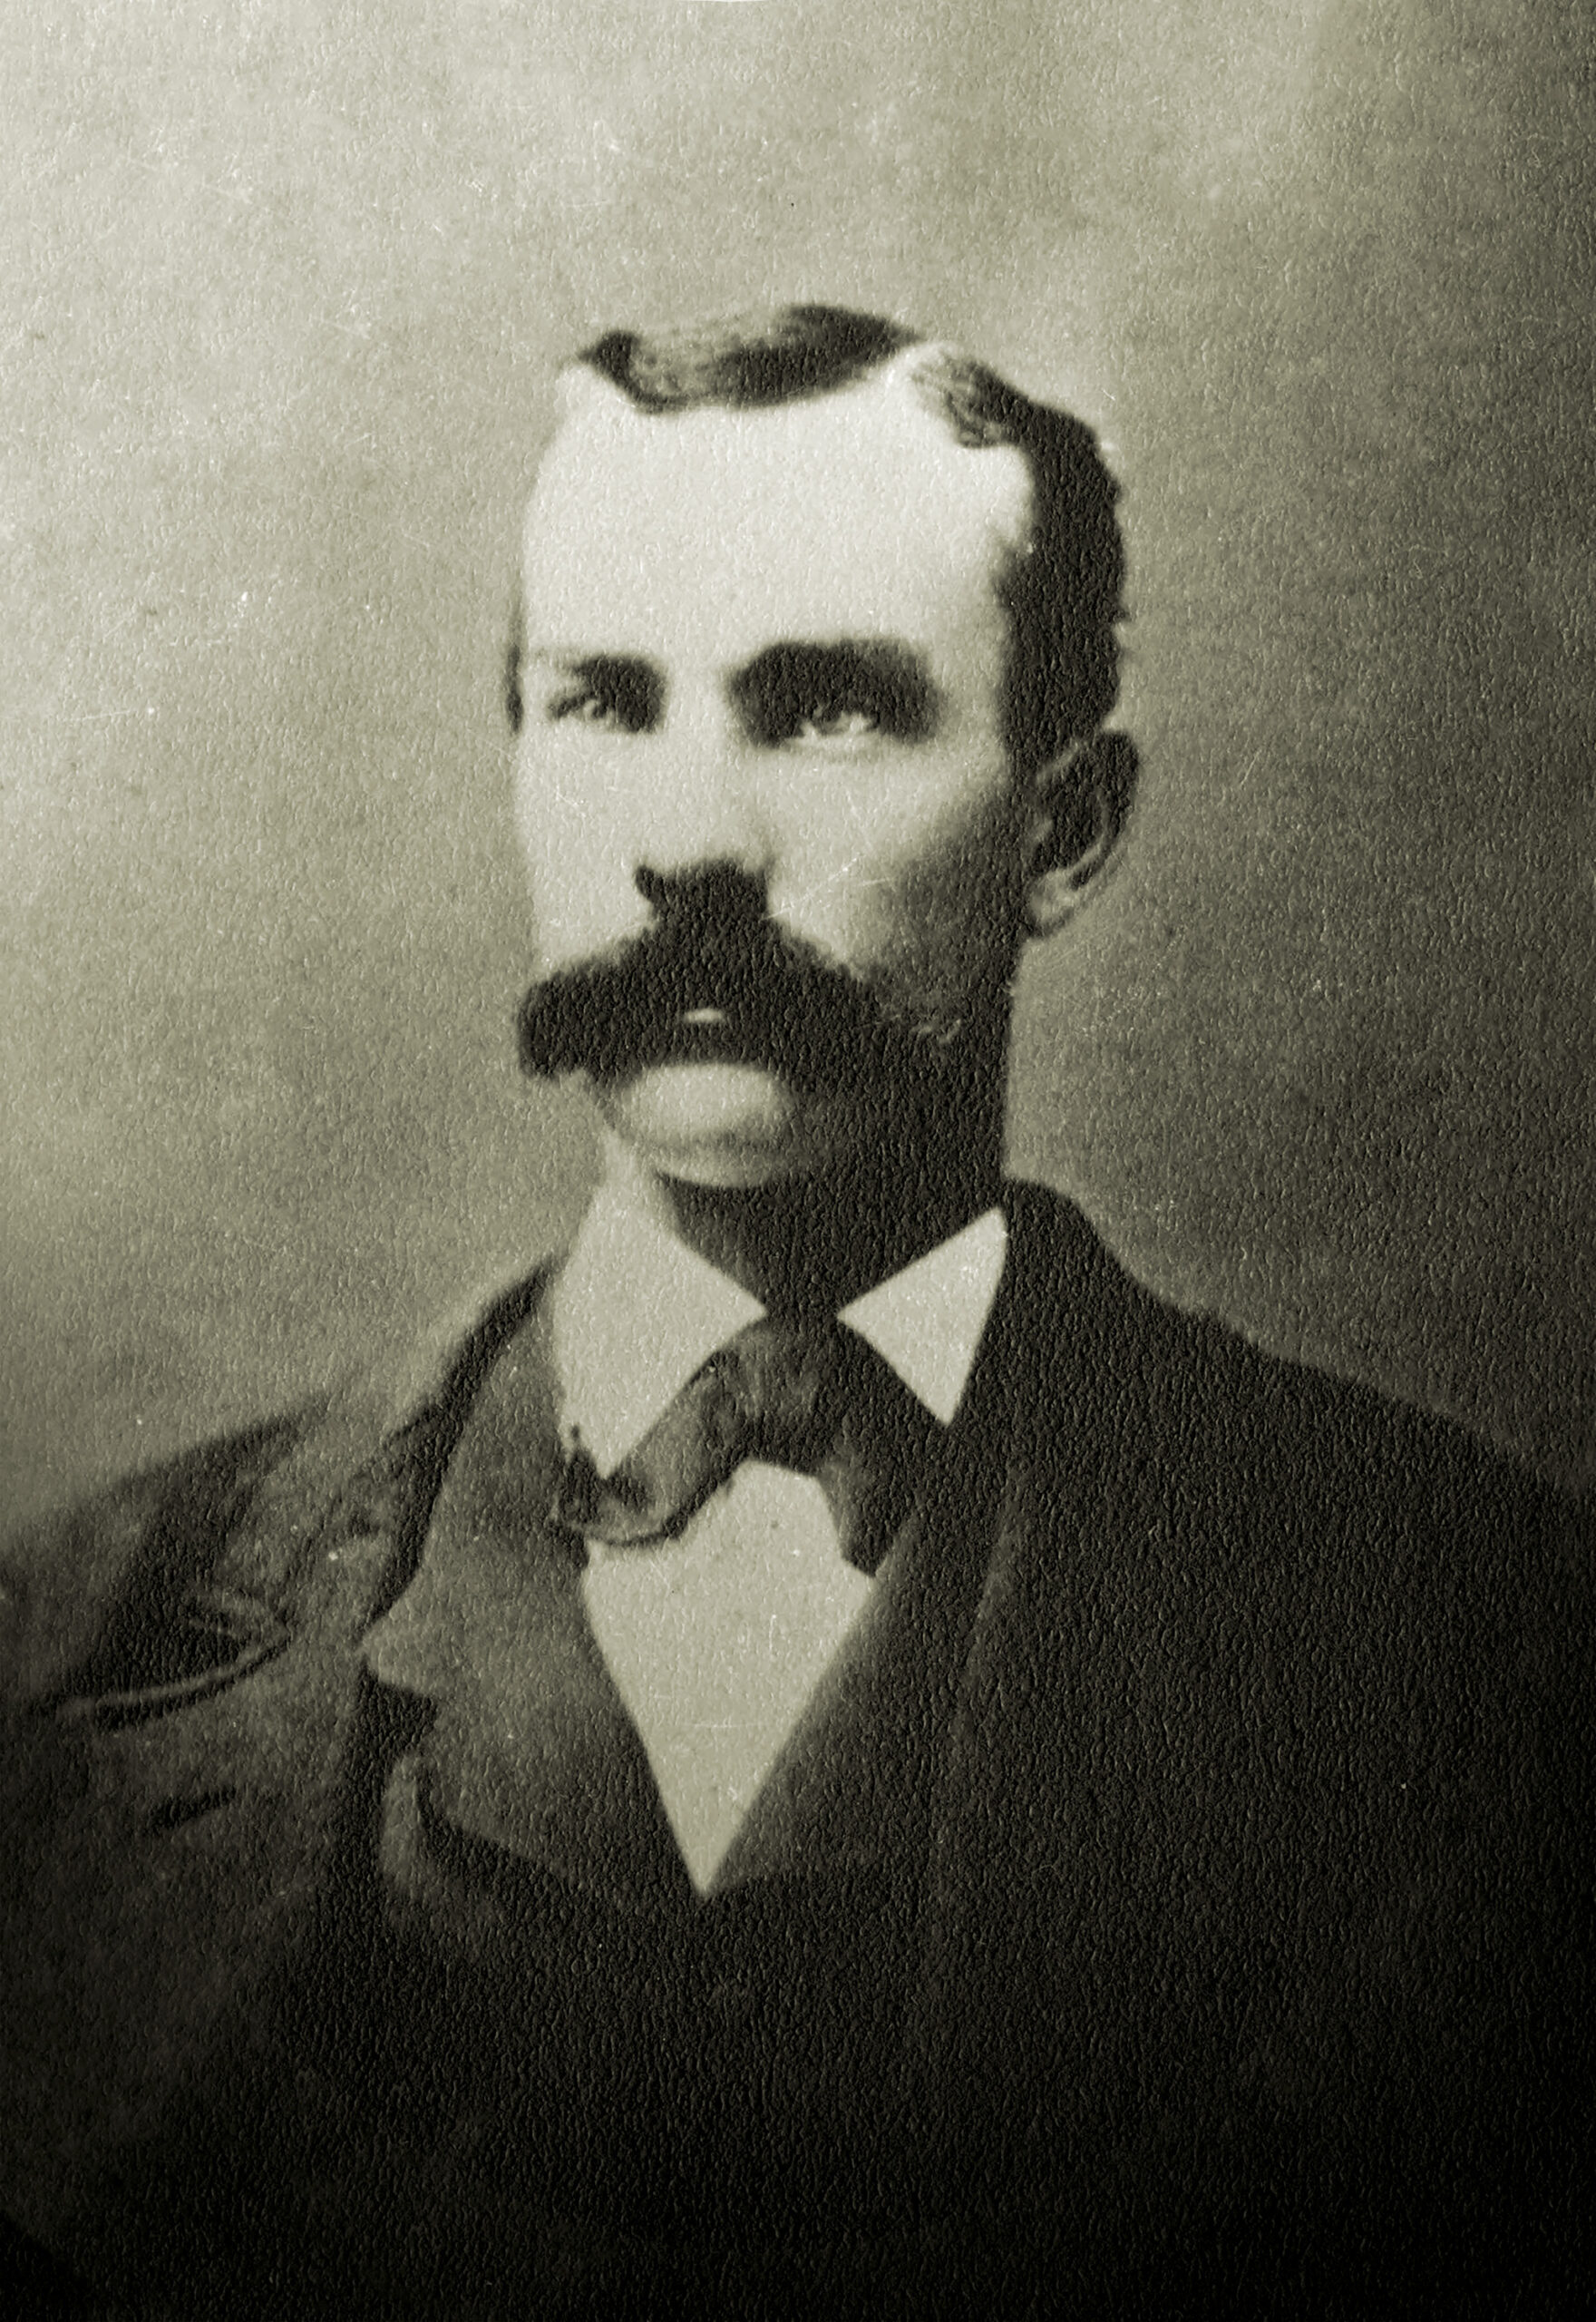 The Mysterious Death of Johnny Ringo